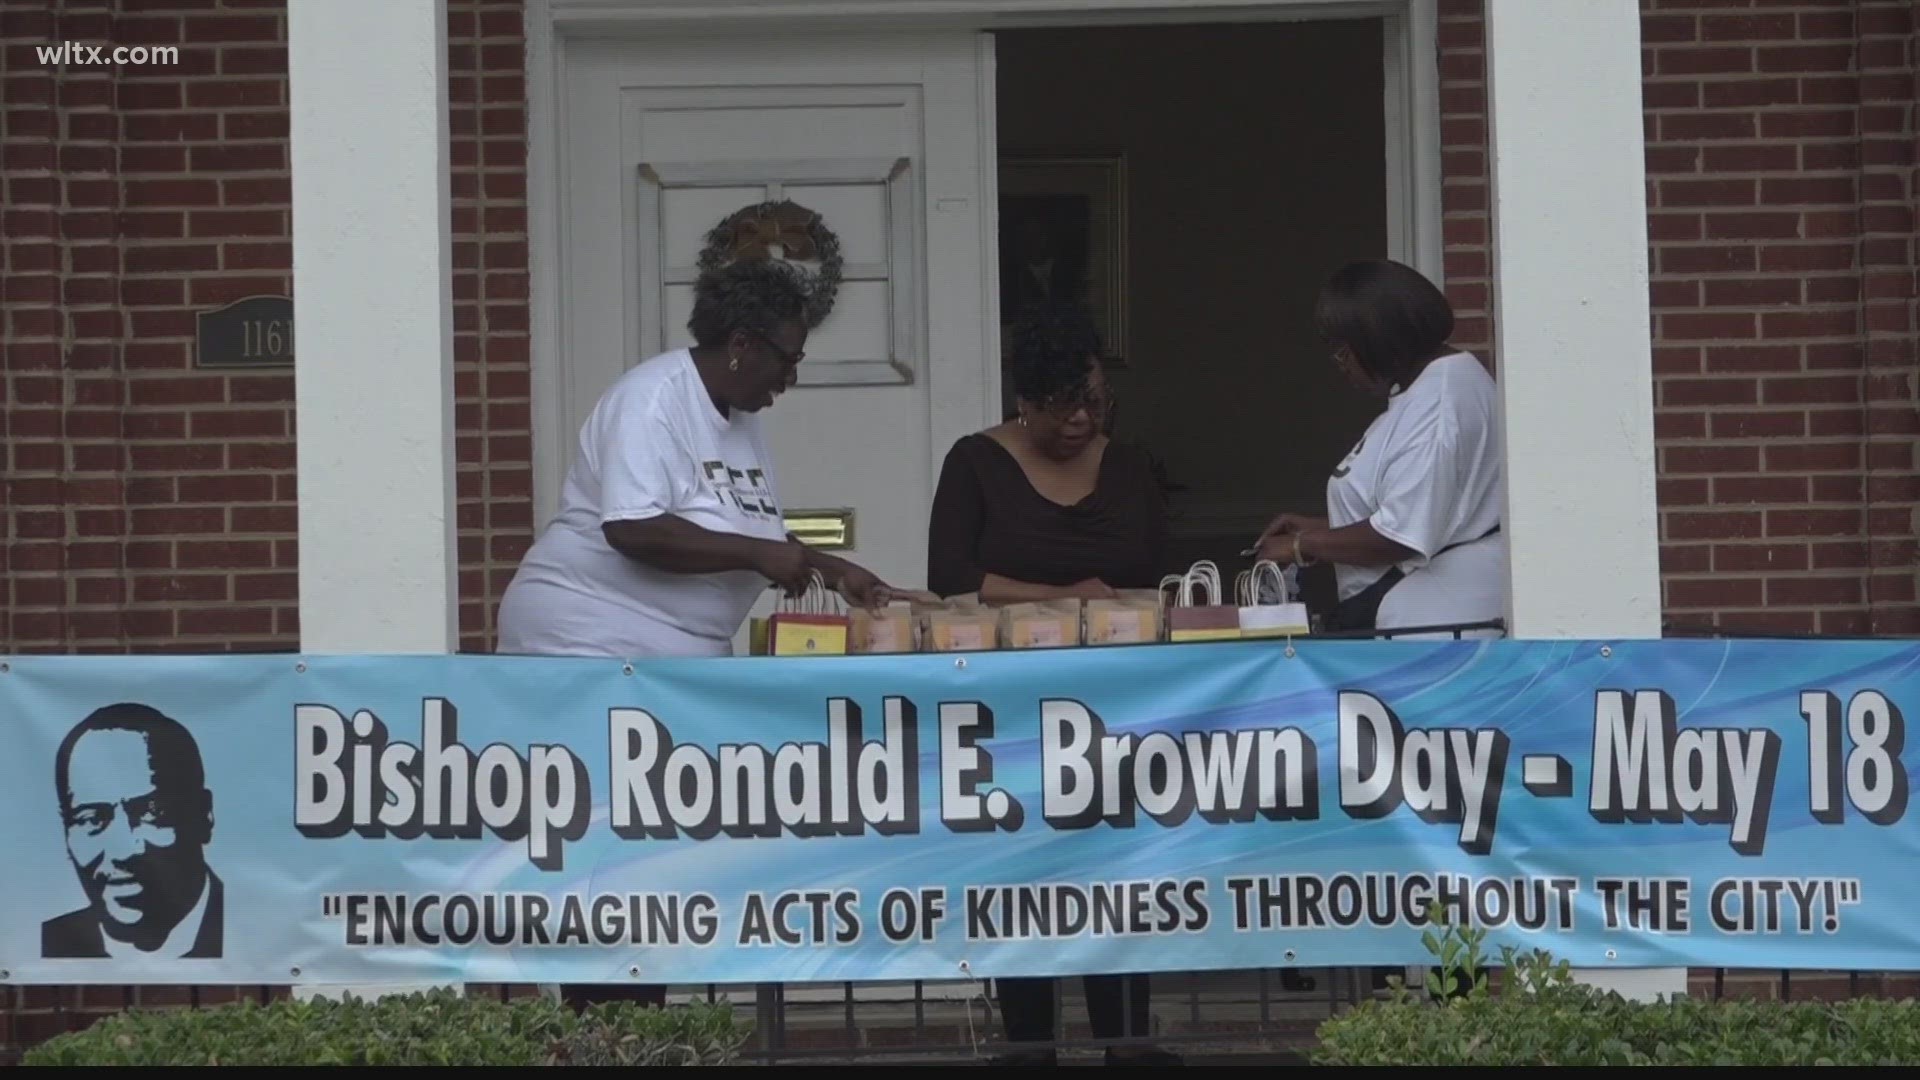 May 18 has been proclaimed Bishop Ronald Brown day in Orangeburg for the 3rd year.